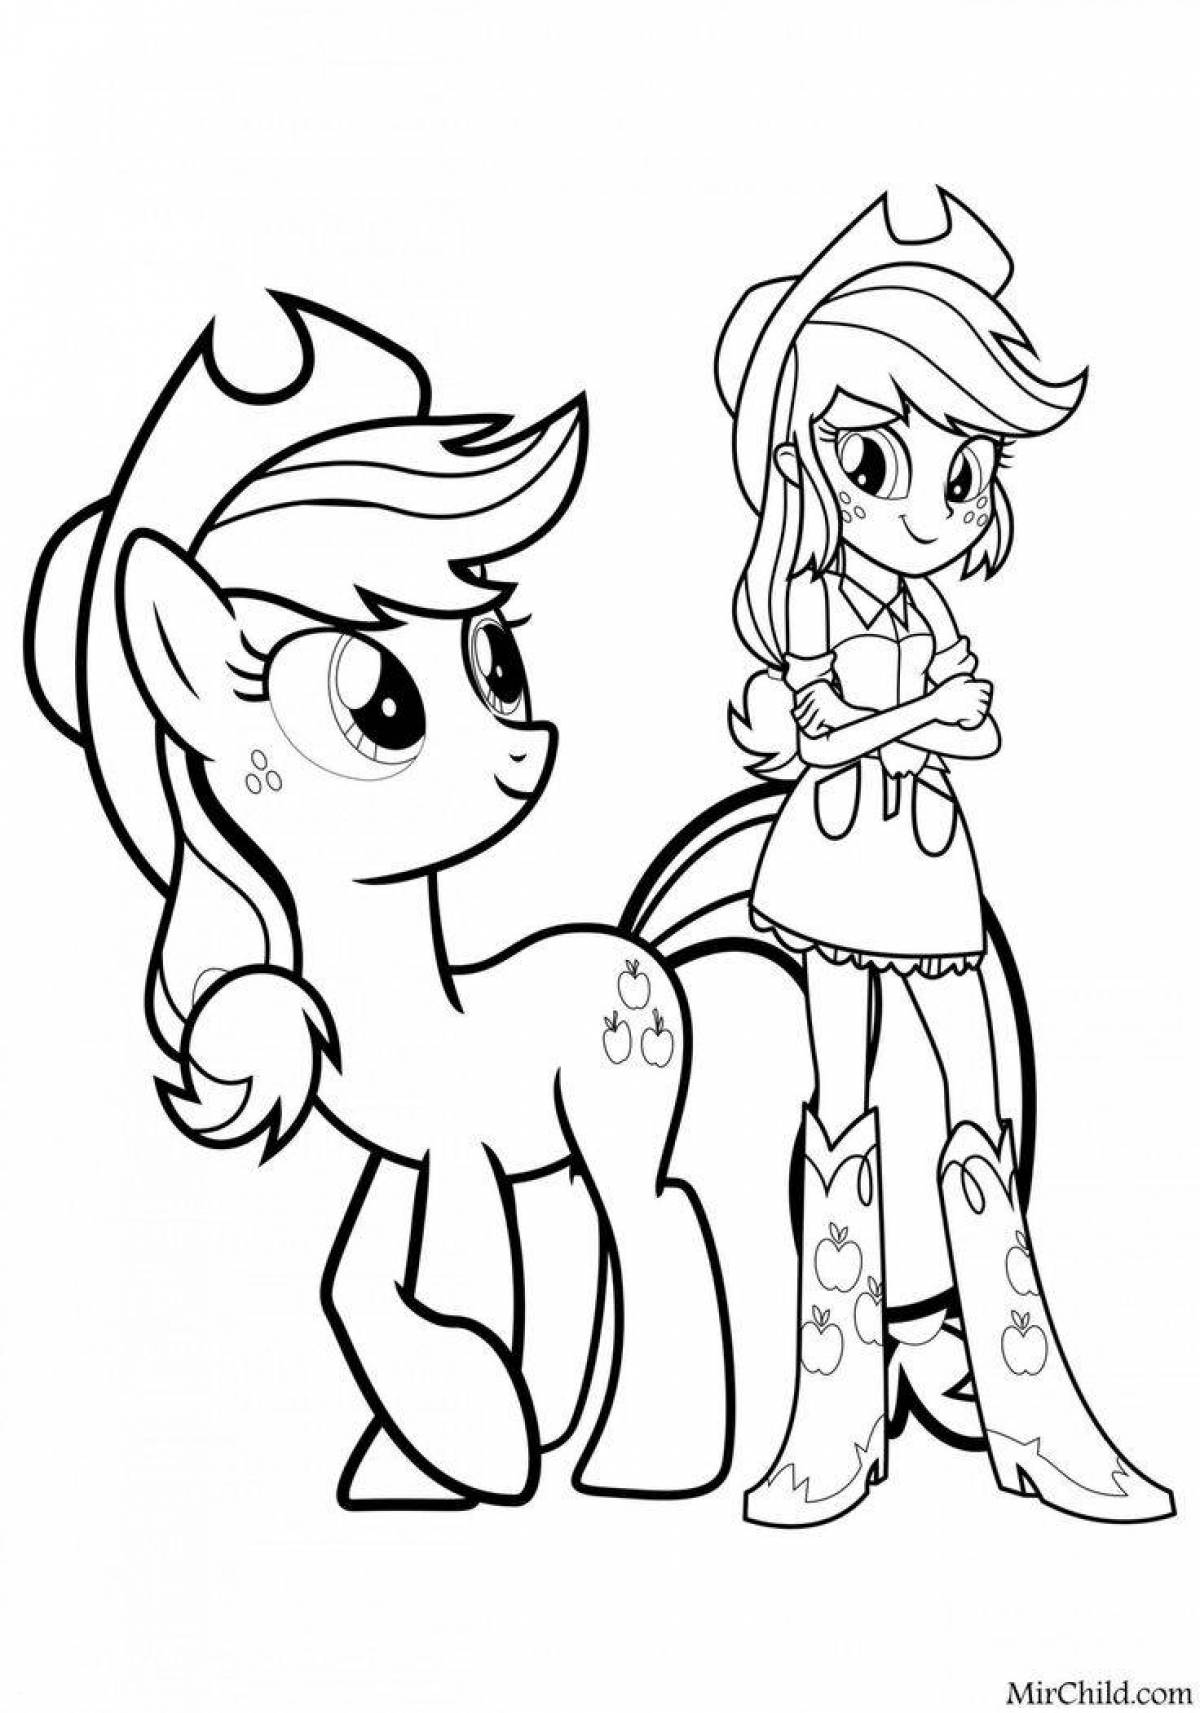 My little pony girls coloring pages